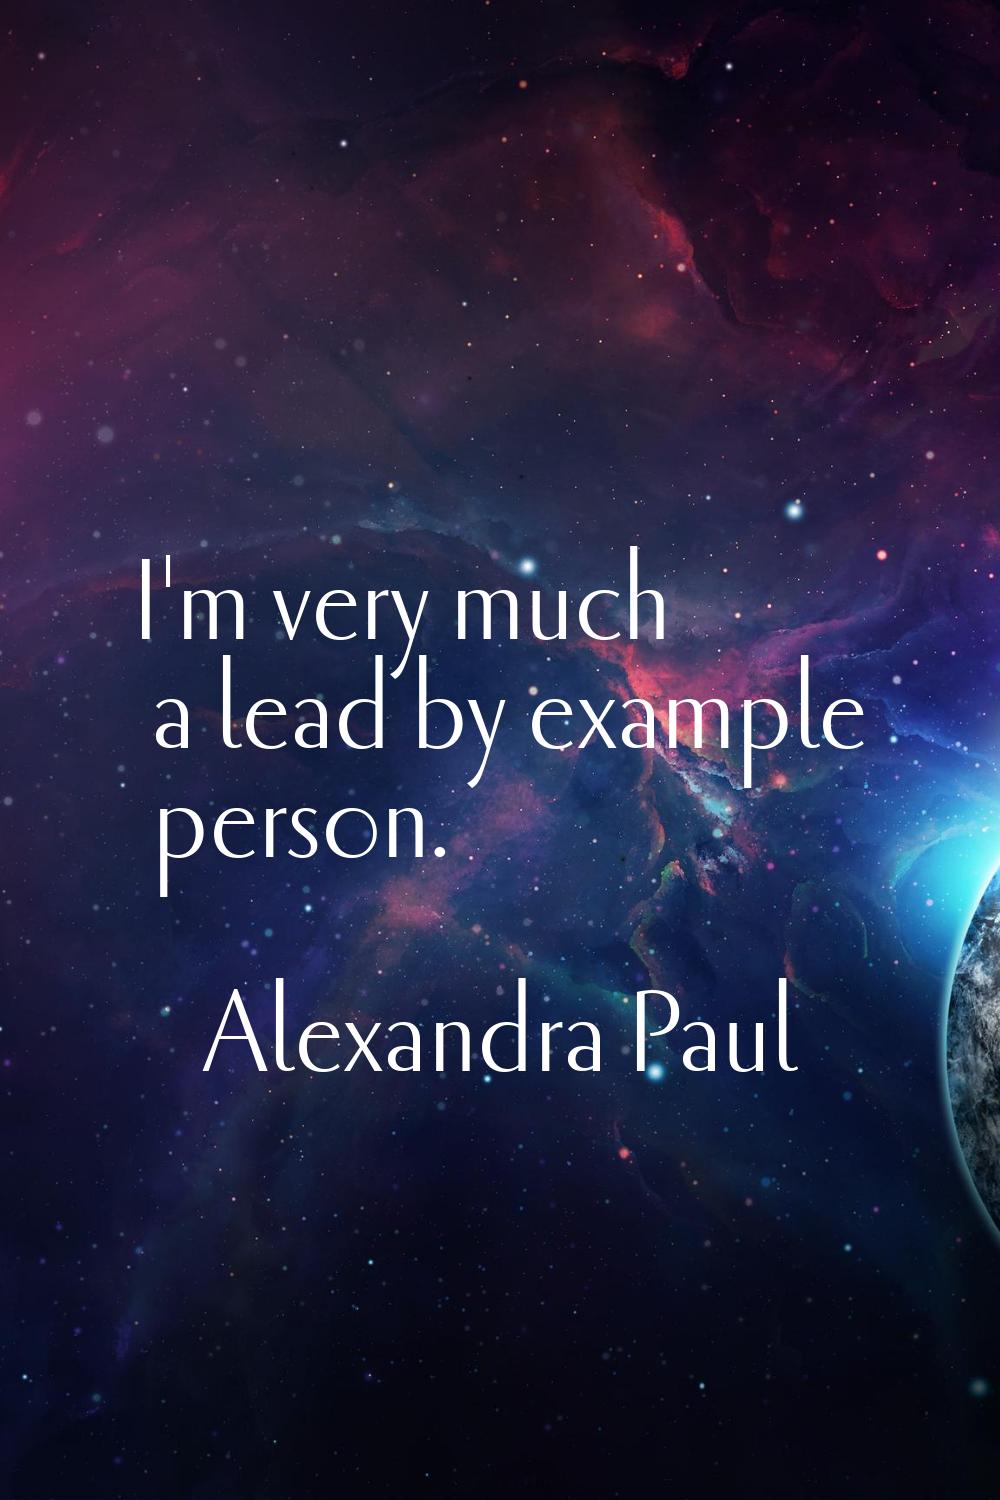 I'm very much a lead by example person.